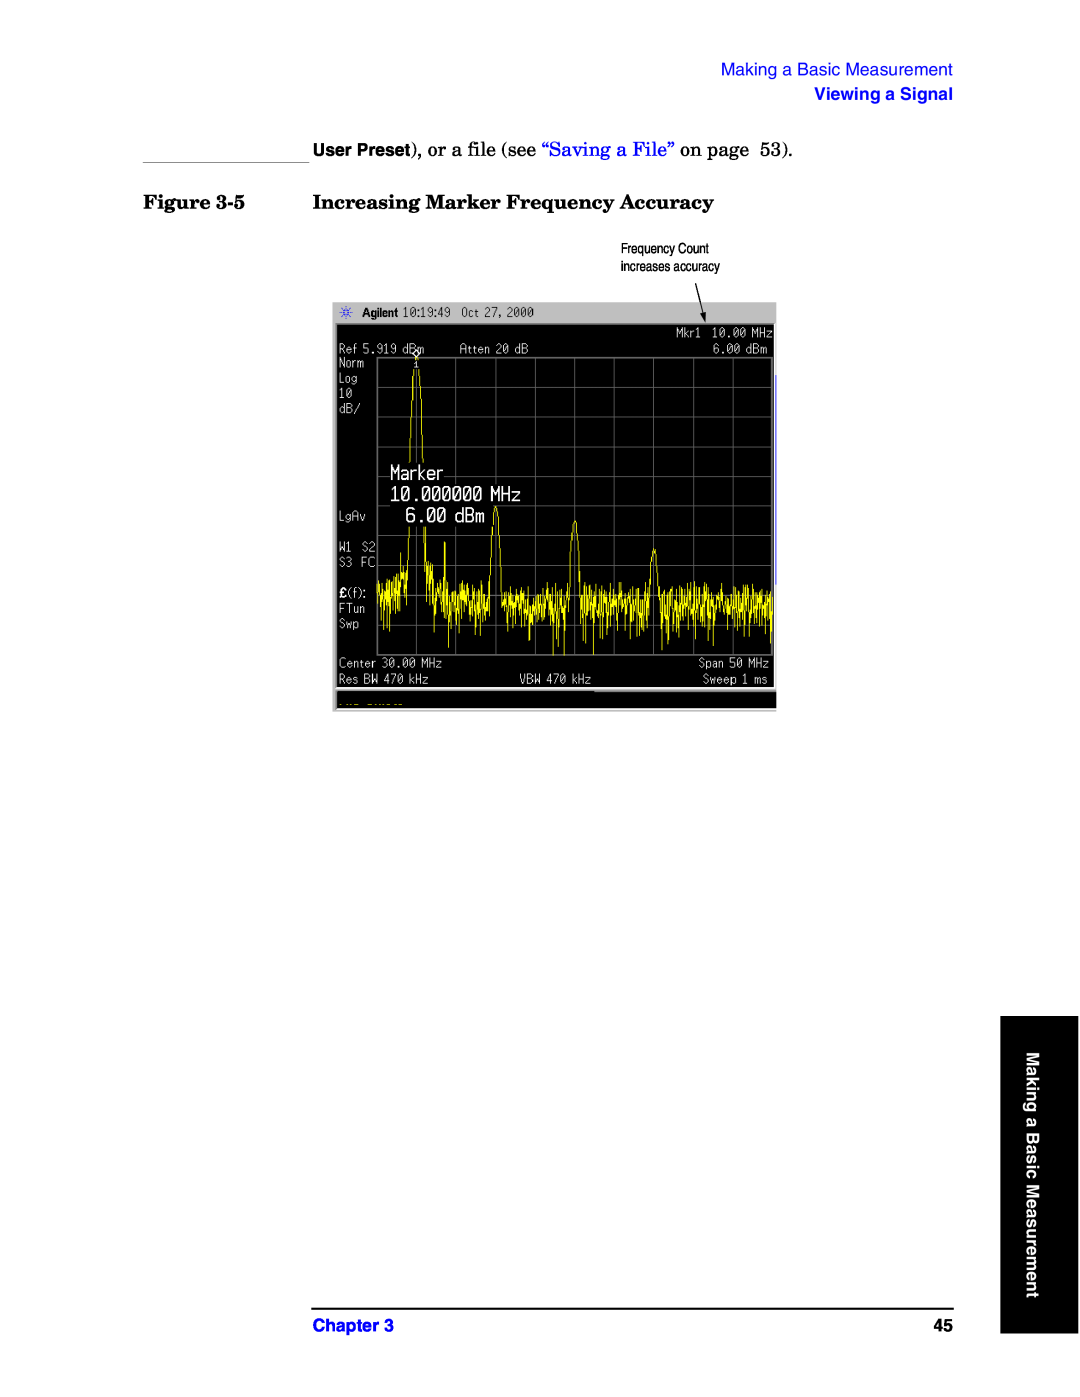 Agilent Technologies E4440A 5Increasing Marker Frequency Accuracy, Making a Basic Measurement, Viewing a Signal, Chapter 